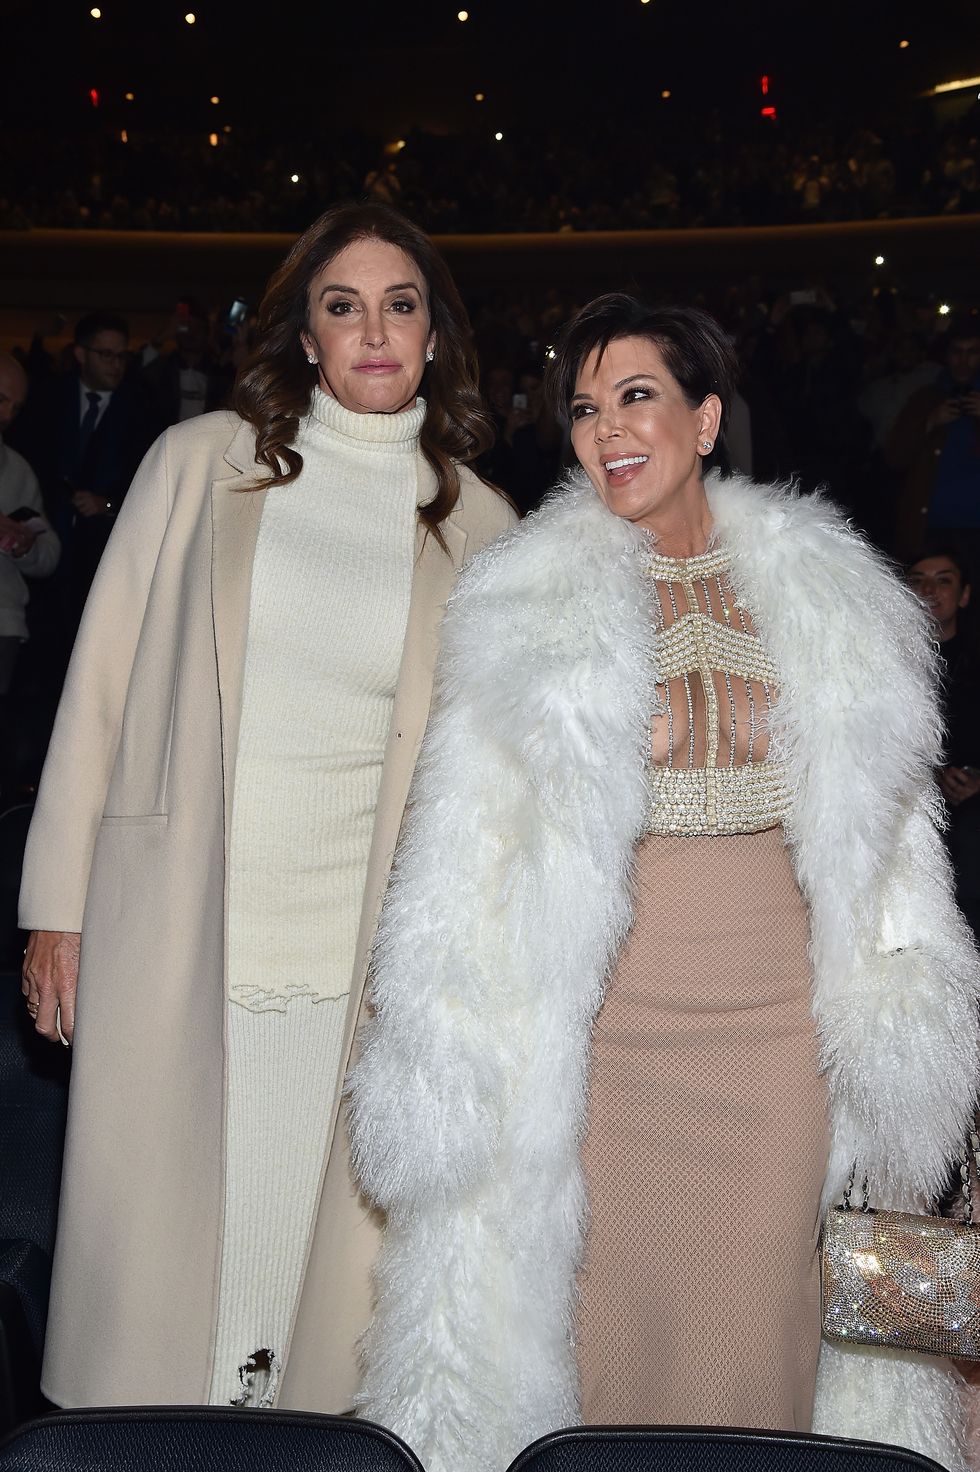 new york, ny february 11 caitlyn jenner l and kris jenner attend kanye west yeezy season 3 on february 11, 2016 in new york city photo by dimitrios kambourisgetty images for yeezy season 3